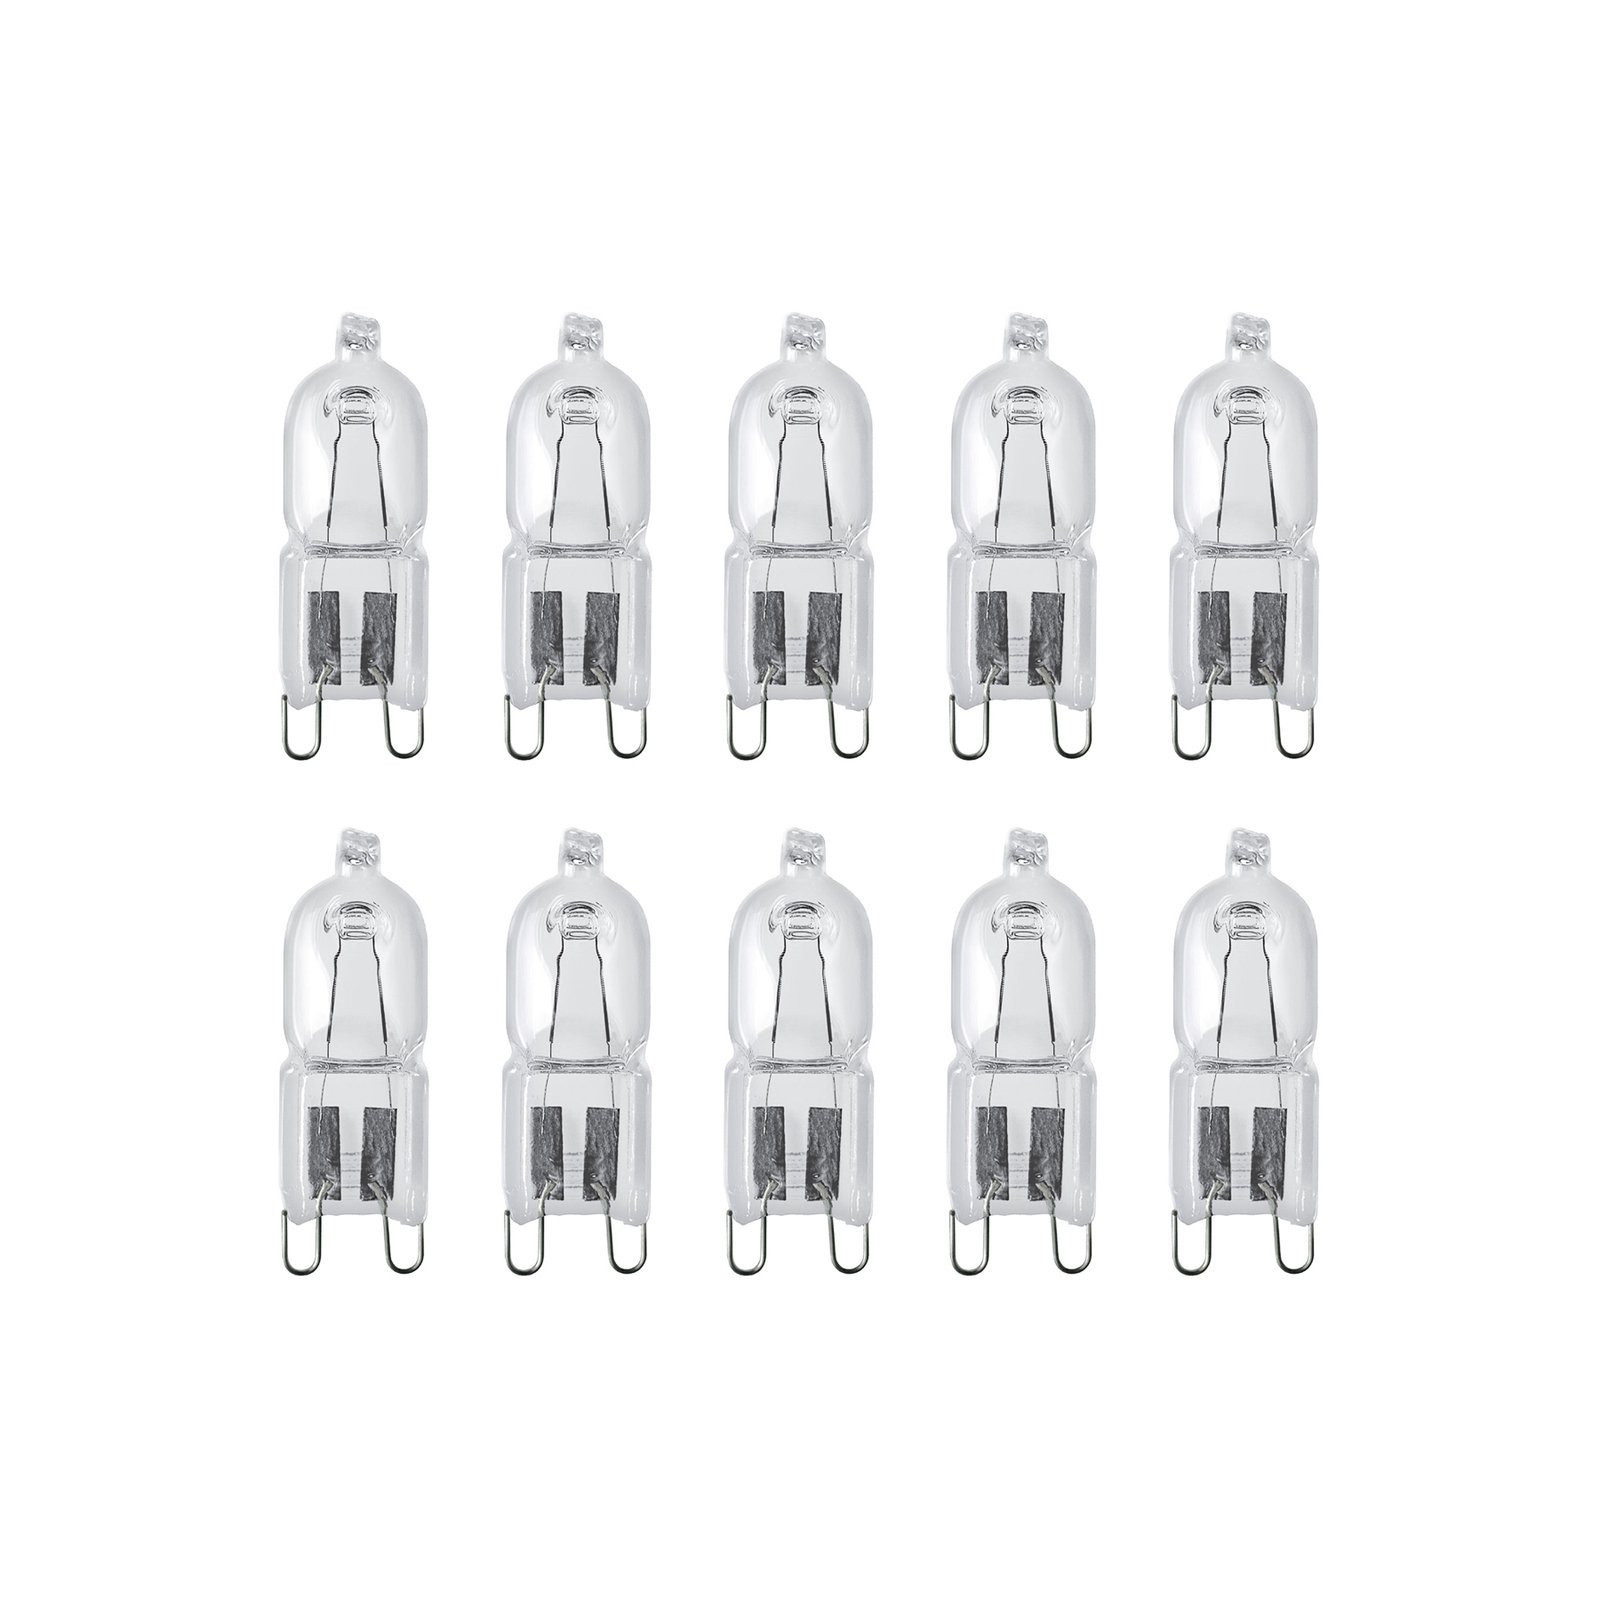 Halopin halogen bulb 48 W clear 2,000 h 10-pack